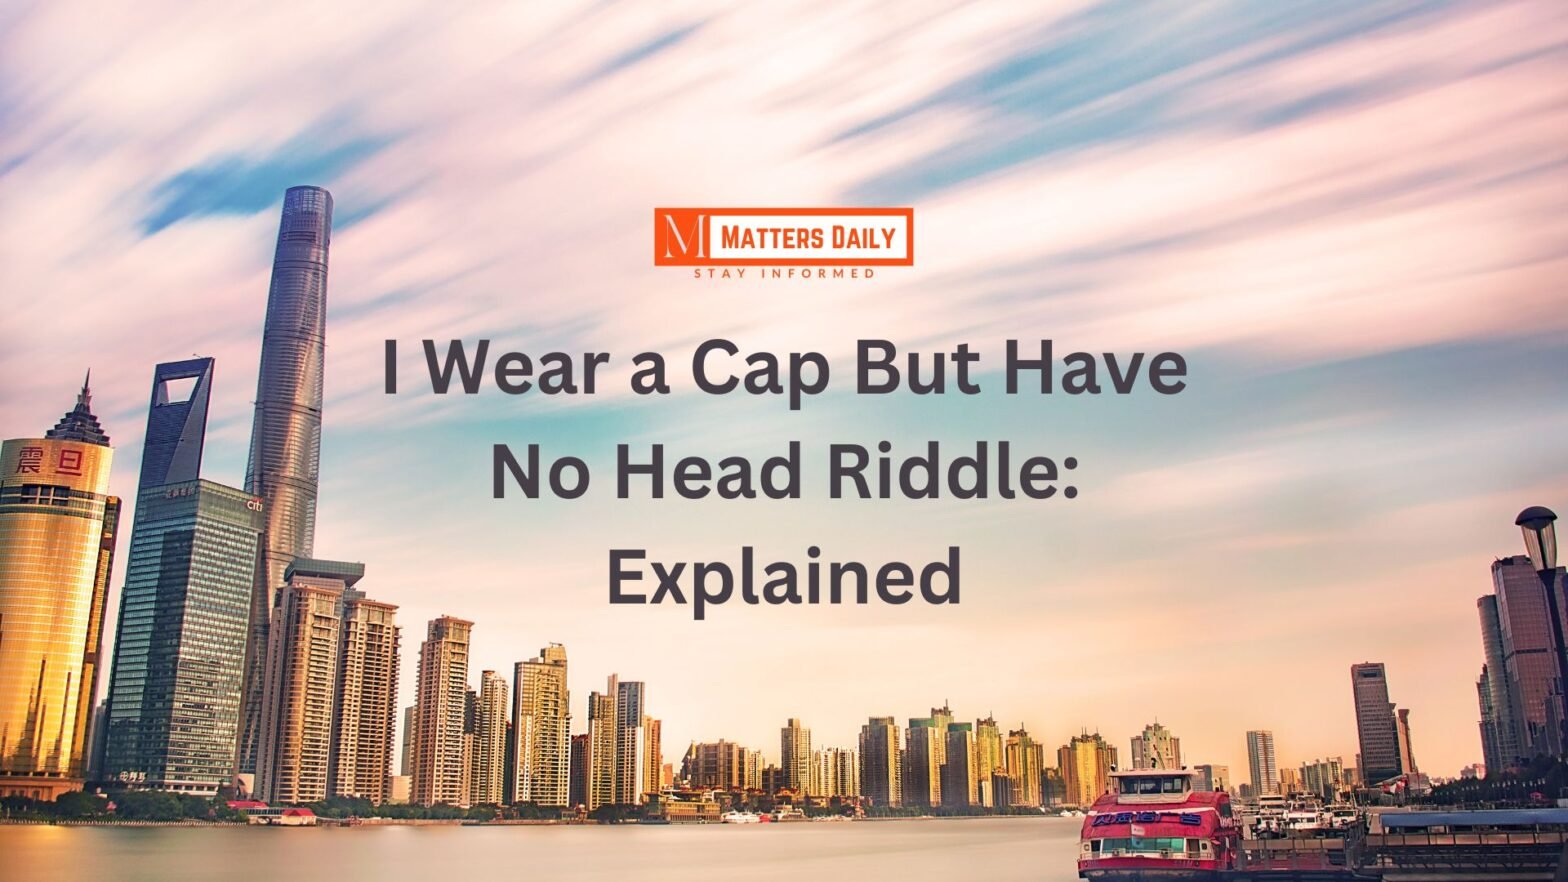 I Wear a Cap But Have No Head Riddle: Explained